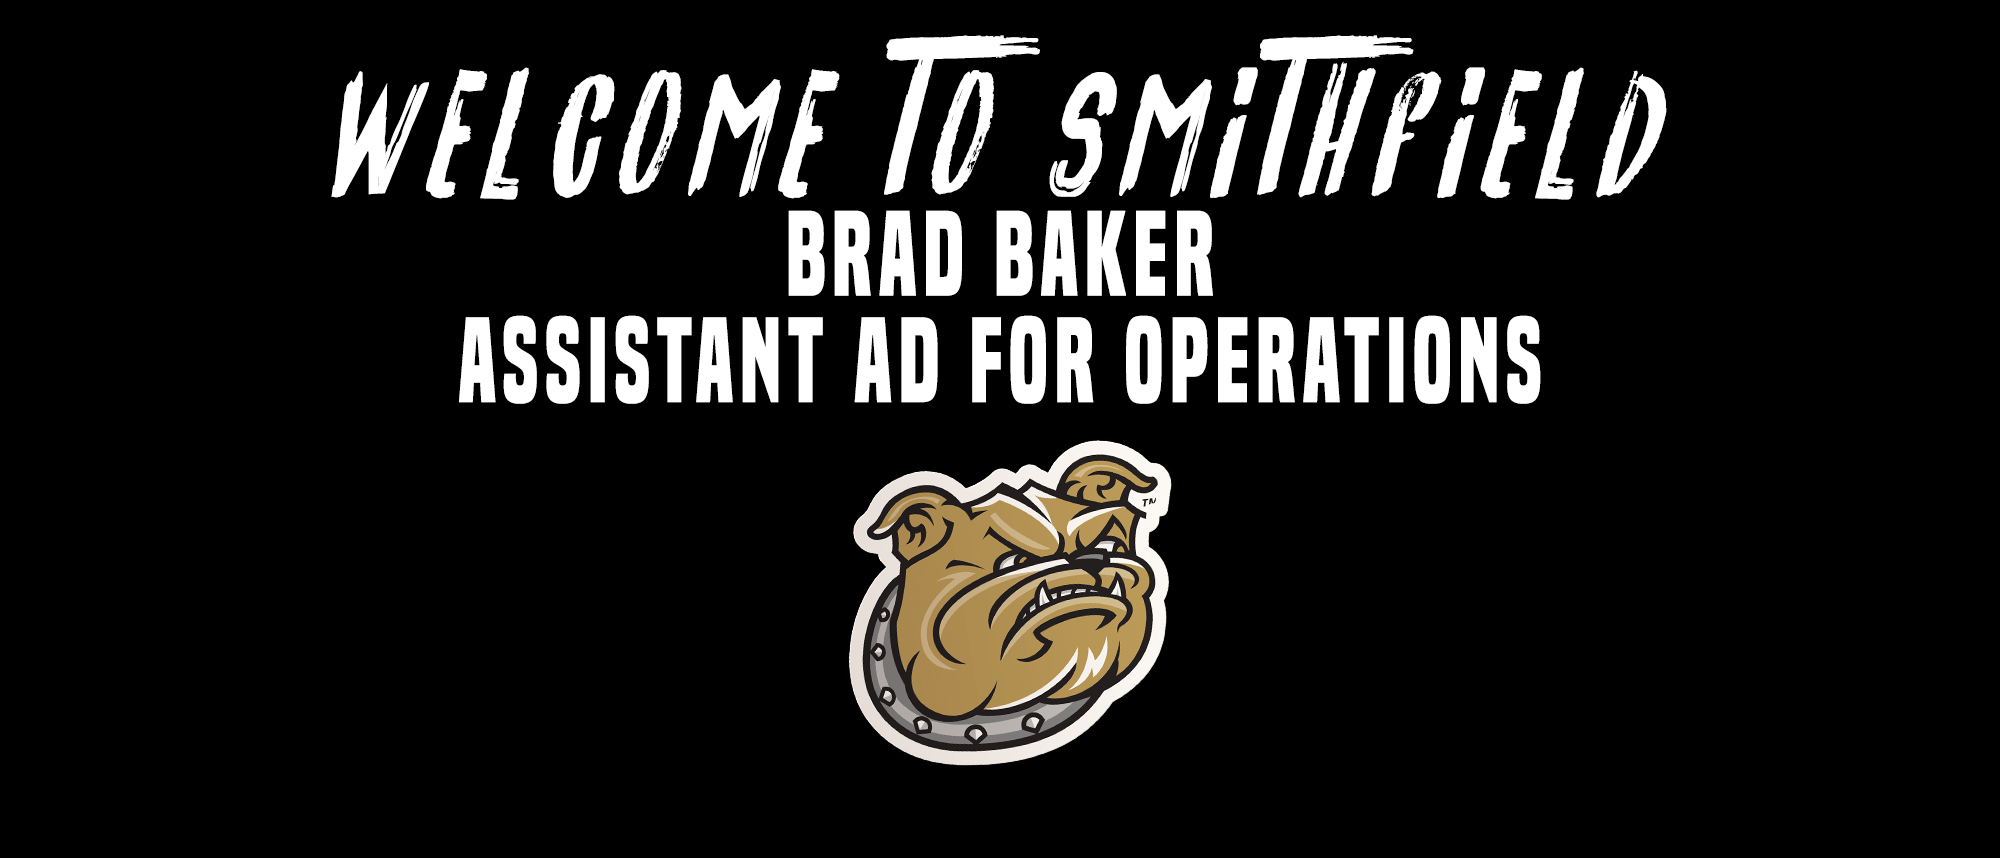 Baker welcomed as Assistant AD for Operations